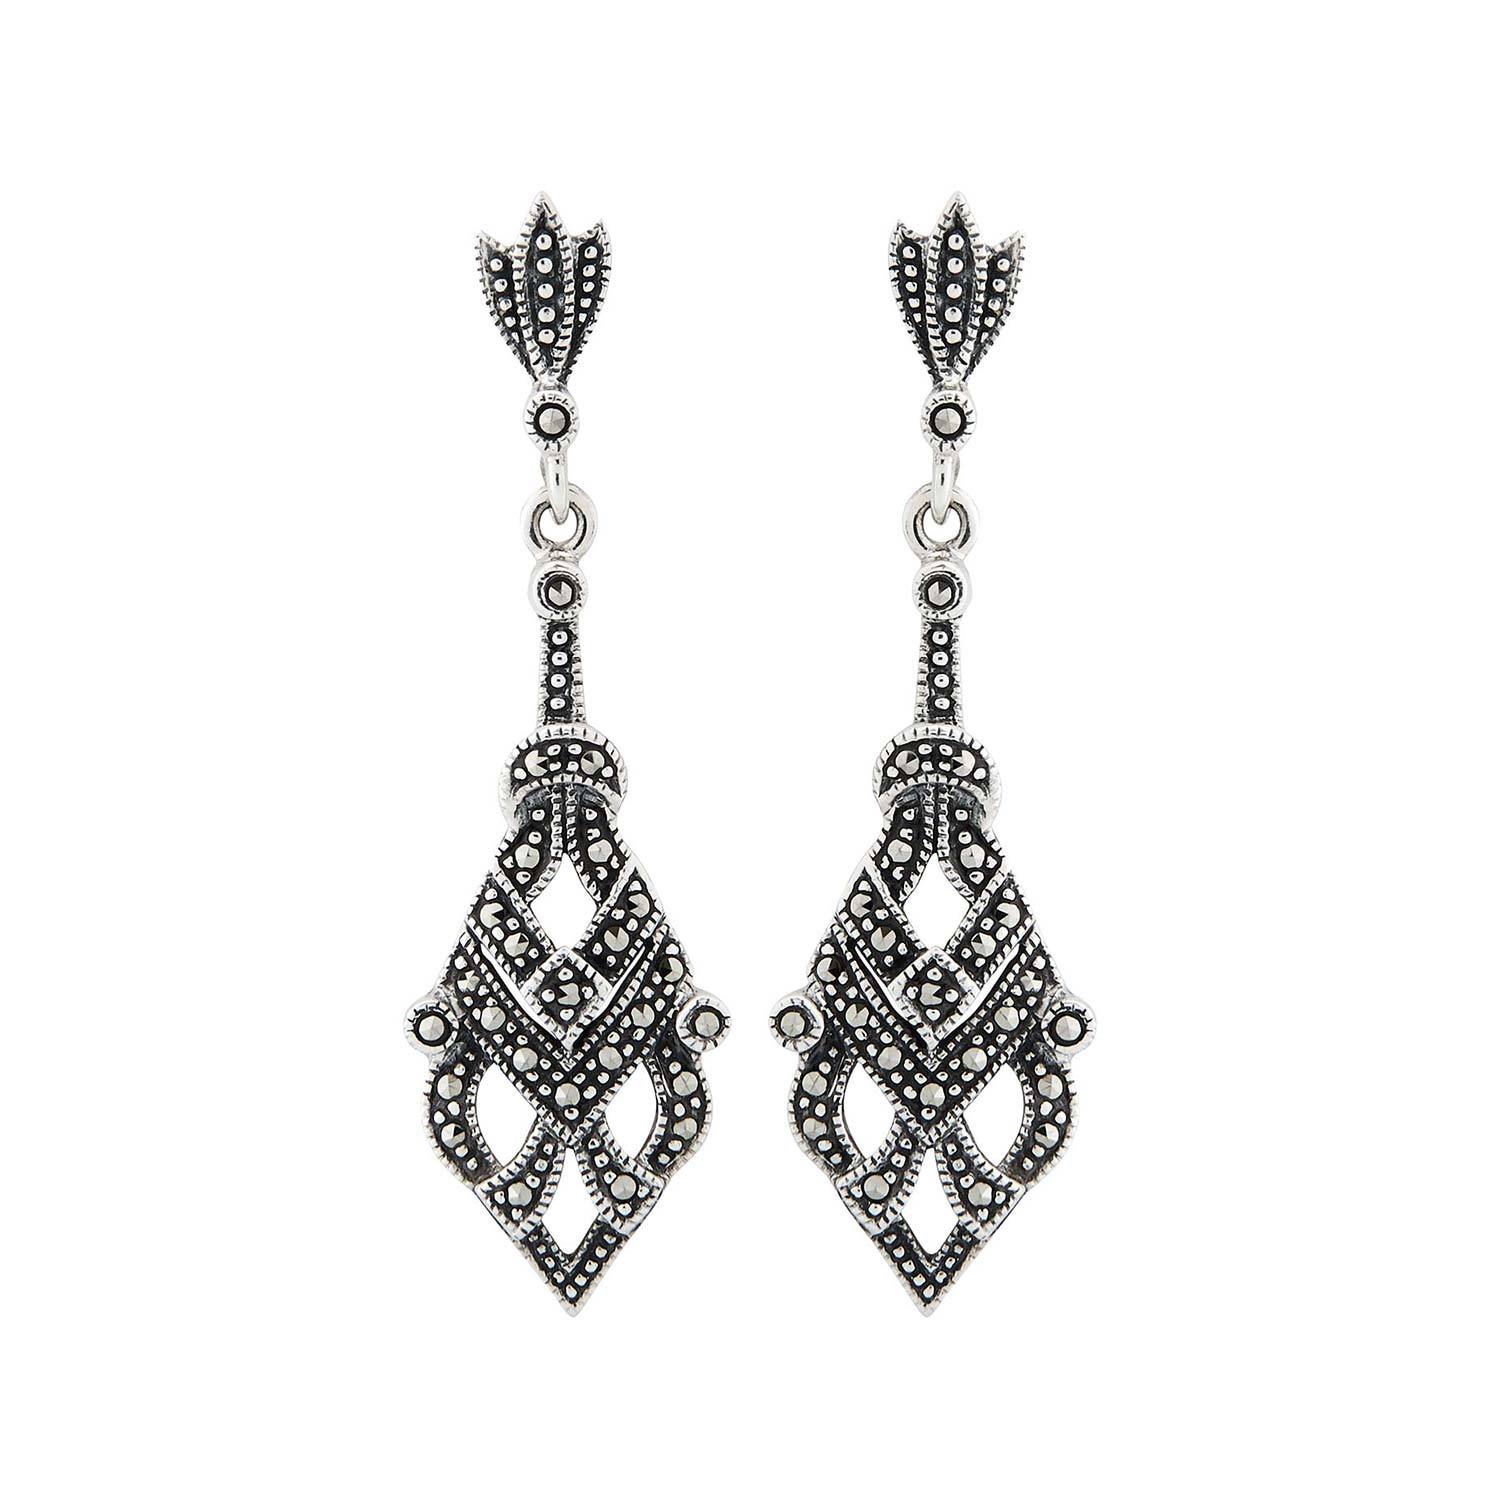 Art Deco Style Drop Earrings: Marcasite and Sterling Silver